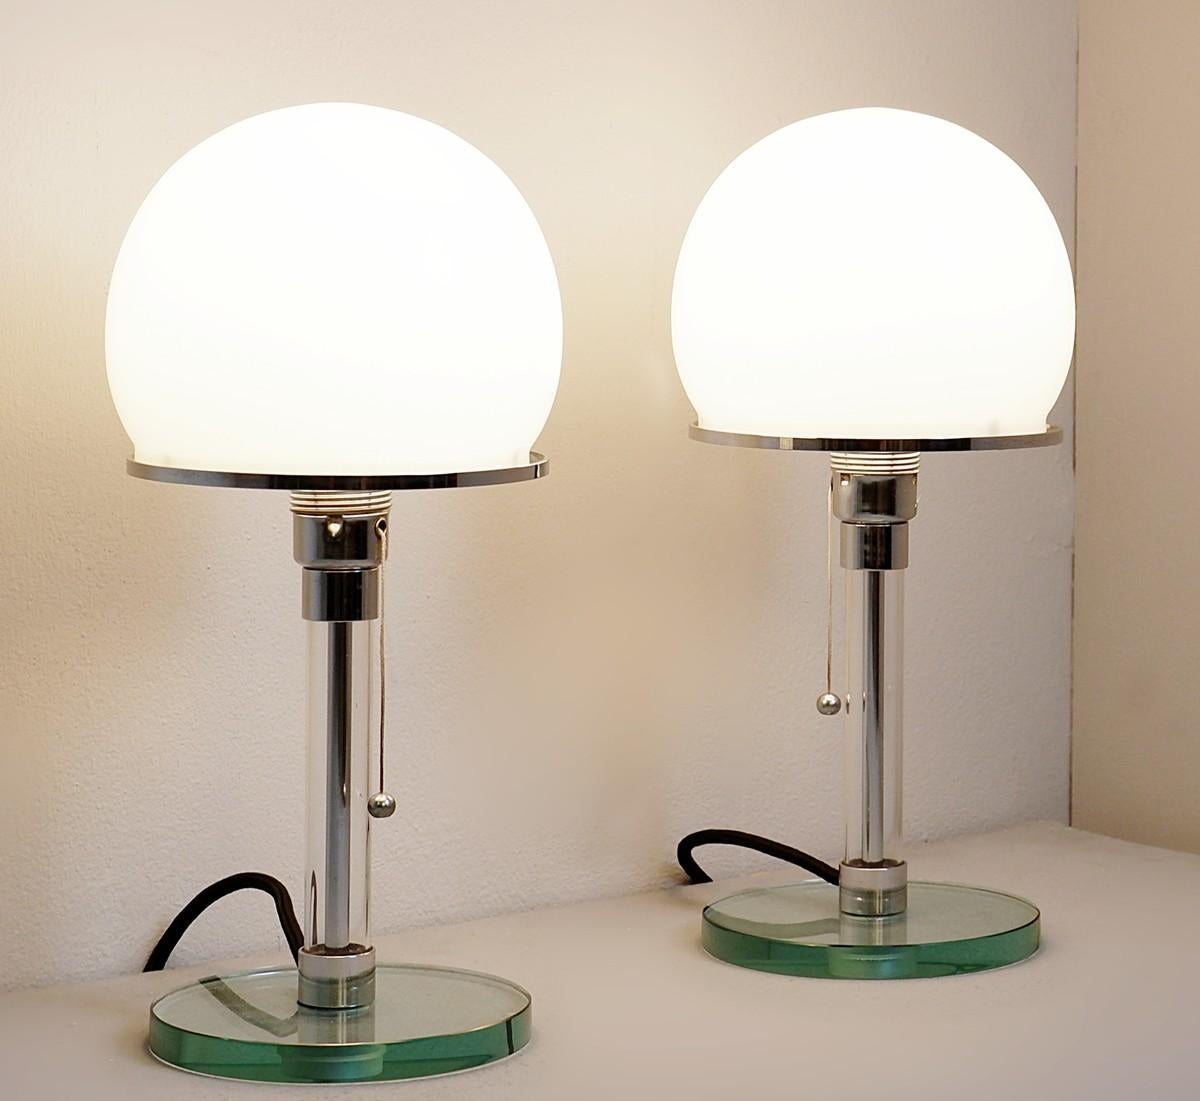 Pair of Bauhaus lamps by William Wagenfeld and Carl Jakob Jucker.